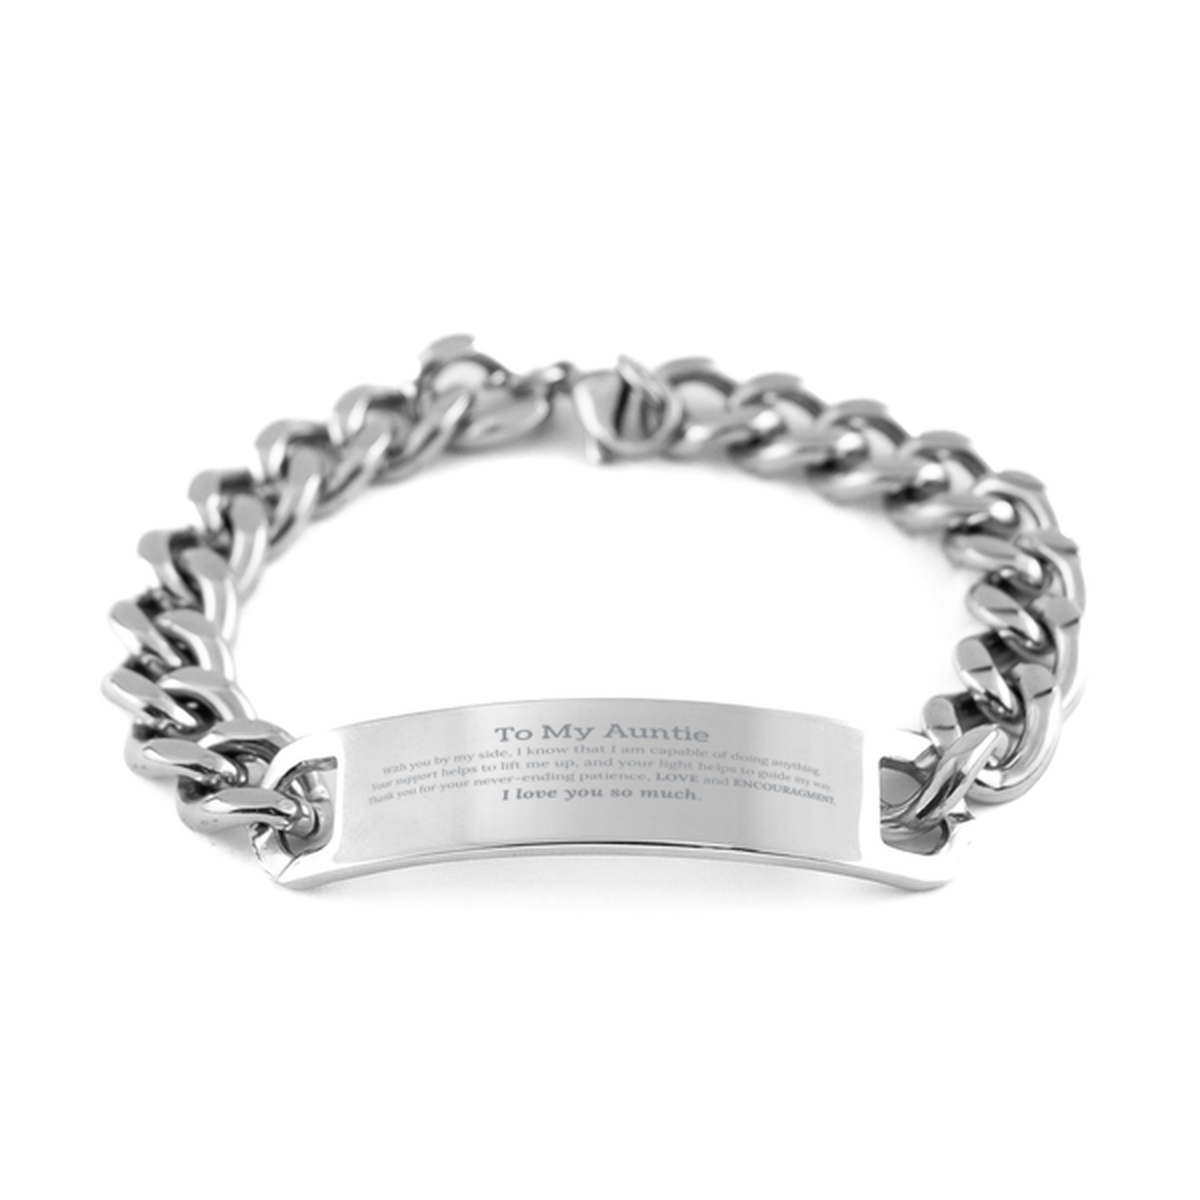 Appreciation Auntie Cuban Chain Stainless Steel Bracelet Gifts, To My Auntie Birthday Christmas Wedding Keepsake Gifts for Auntie With you by my side, I know that I am capable of doing anything. I love you so much